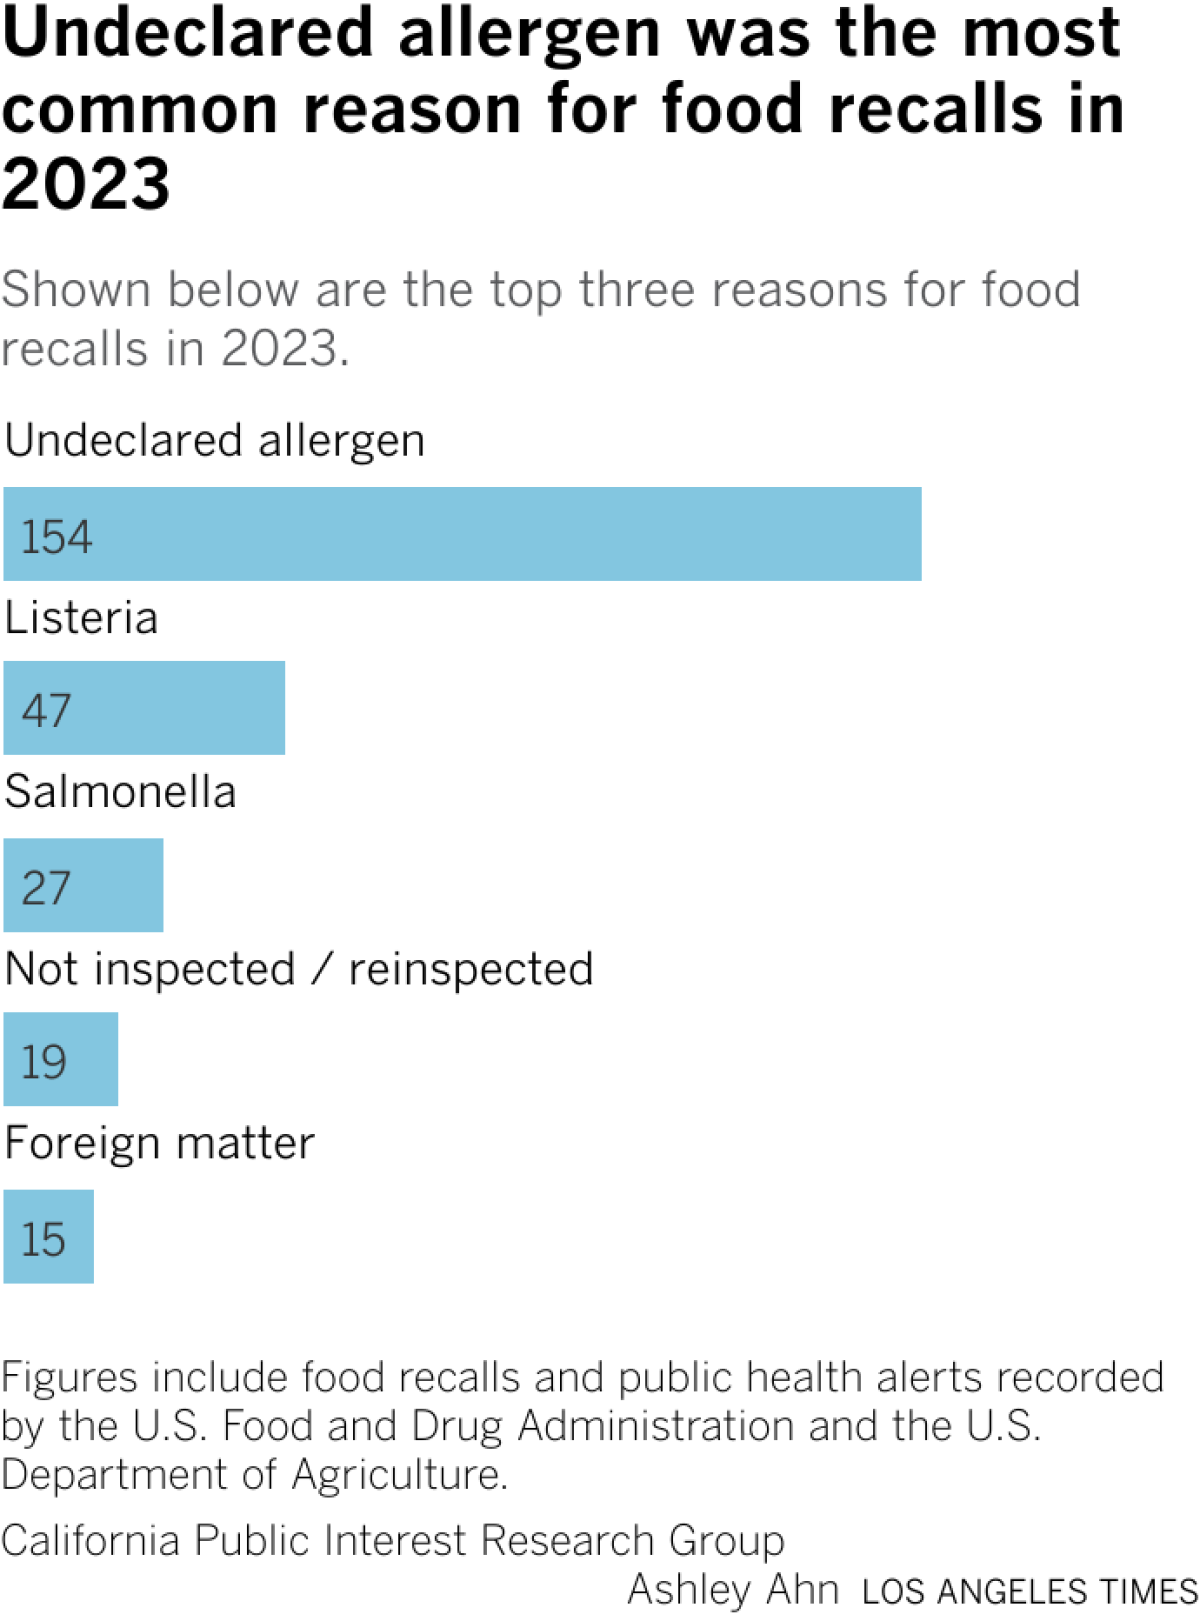 The most common reason for food recalls in 2023 was an undeclared allergen, making up for nearly half of all food recalls. Listeria and salmonella followed.  